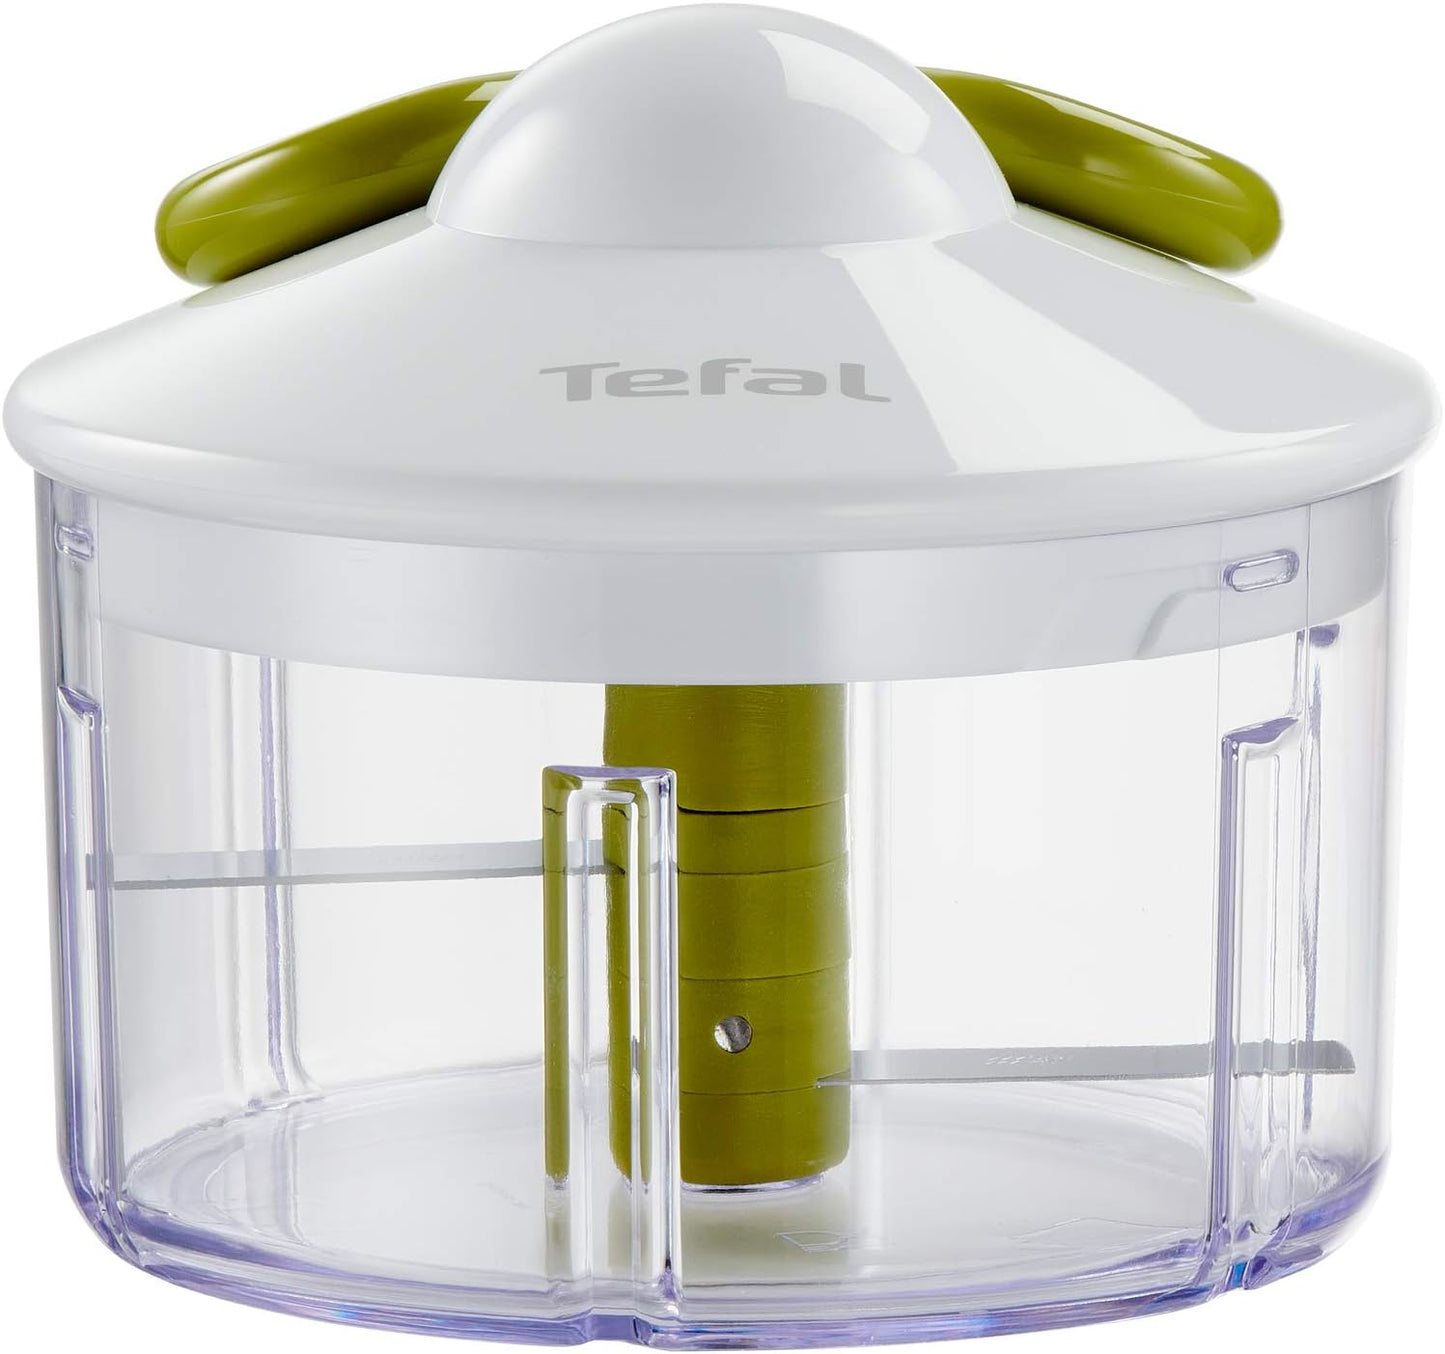 Tefal 5-Second Chopper, 900 ml, Manual Food Chopper and Mixer, Easy to Use, Stainless Steel Blades, Safe to Use, Versatile Results, Vegetables, Onions, Hummus, Guacamole, Herbs And Nuts, K1320404